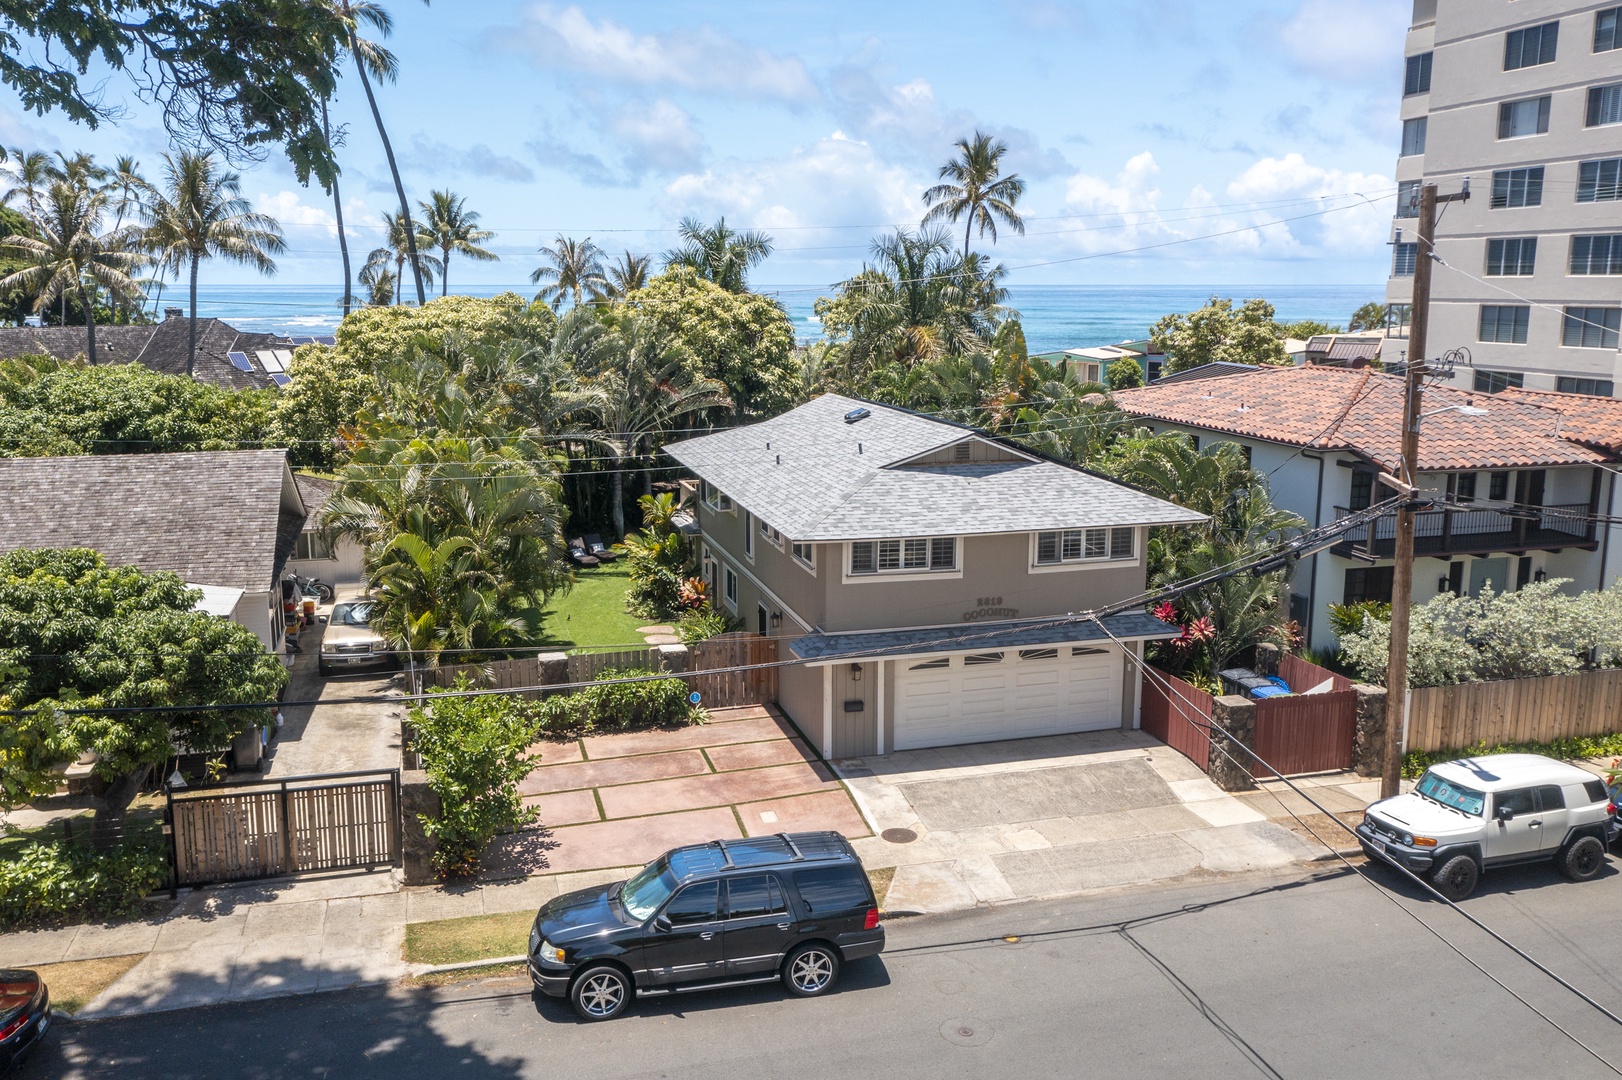 Honolulu Vacation Rentals, Hale Nui - Aerial of the House